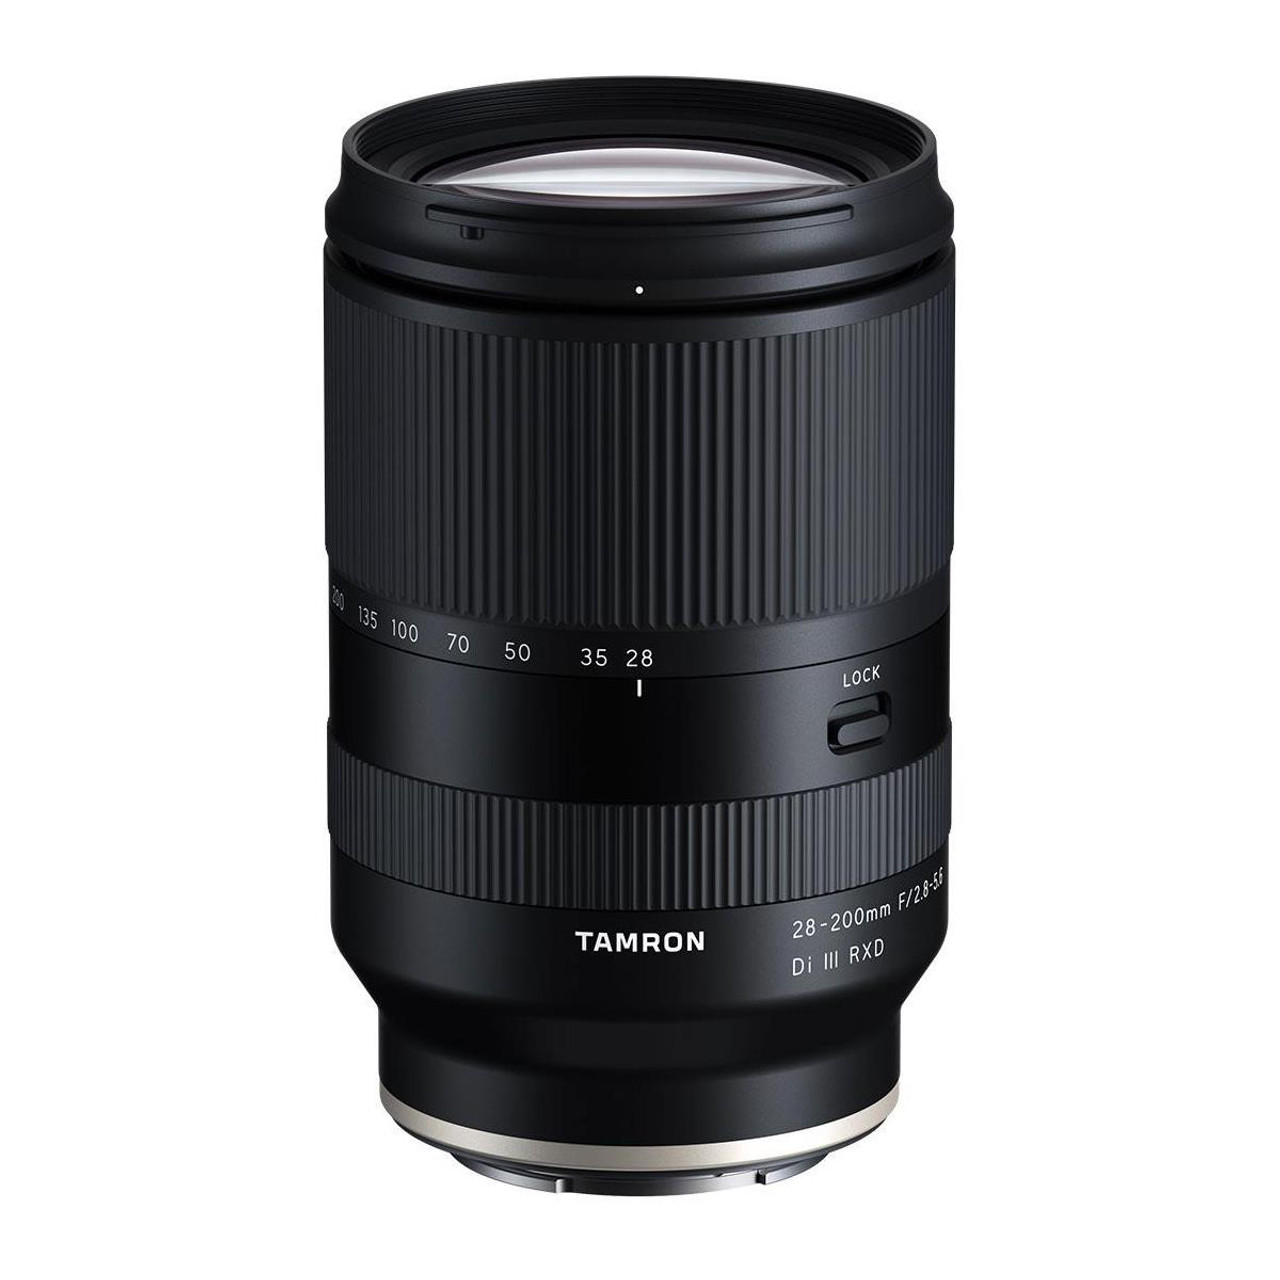 Tamron 28-200mm f/2.8-5.6 Di III RXD Lens for Sony E | Bedfords.com